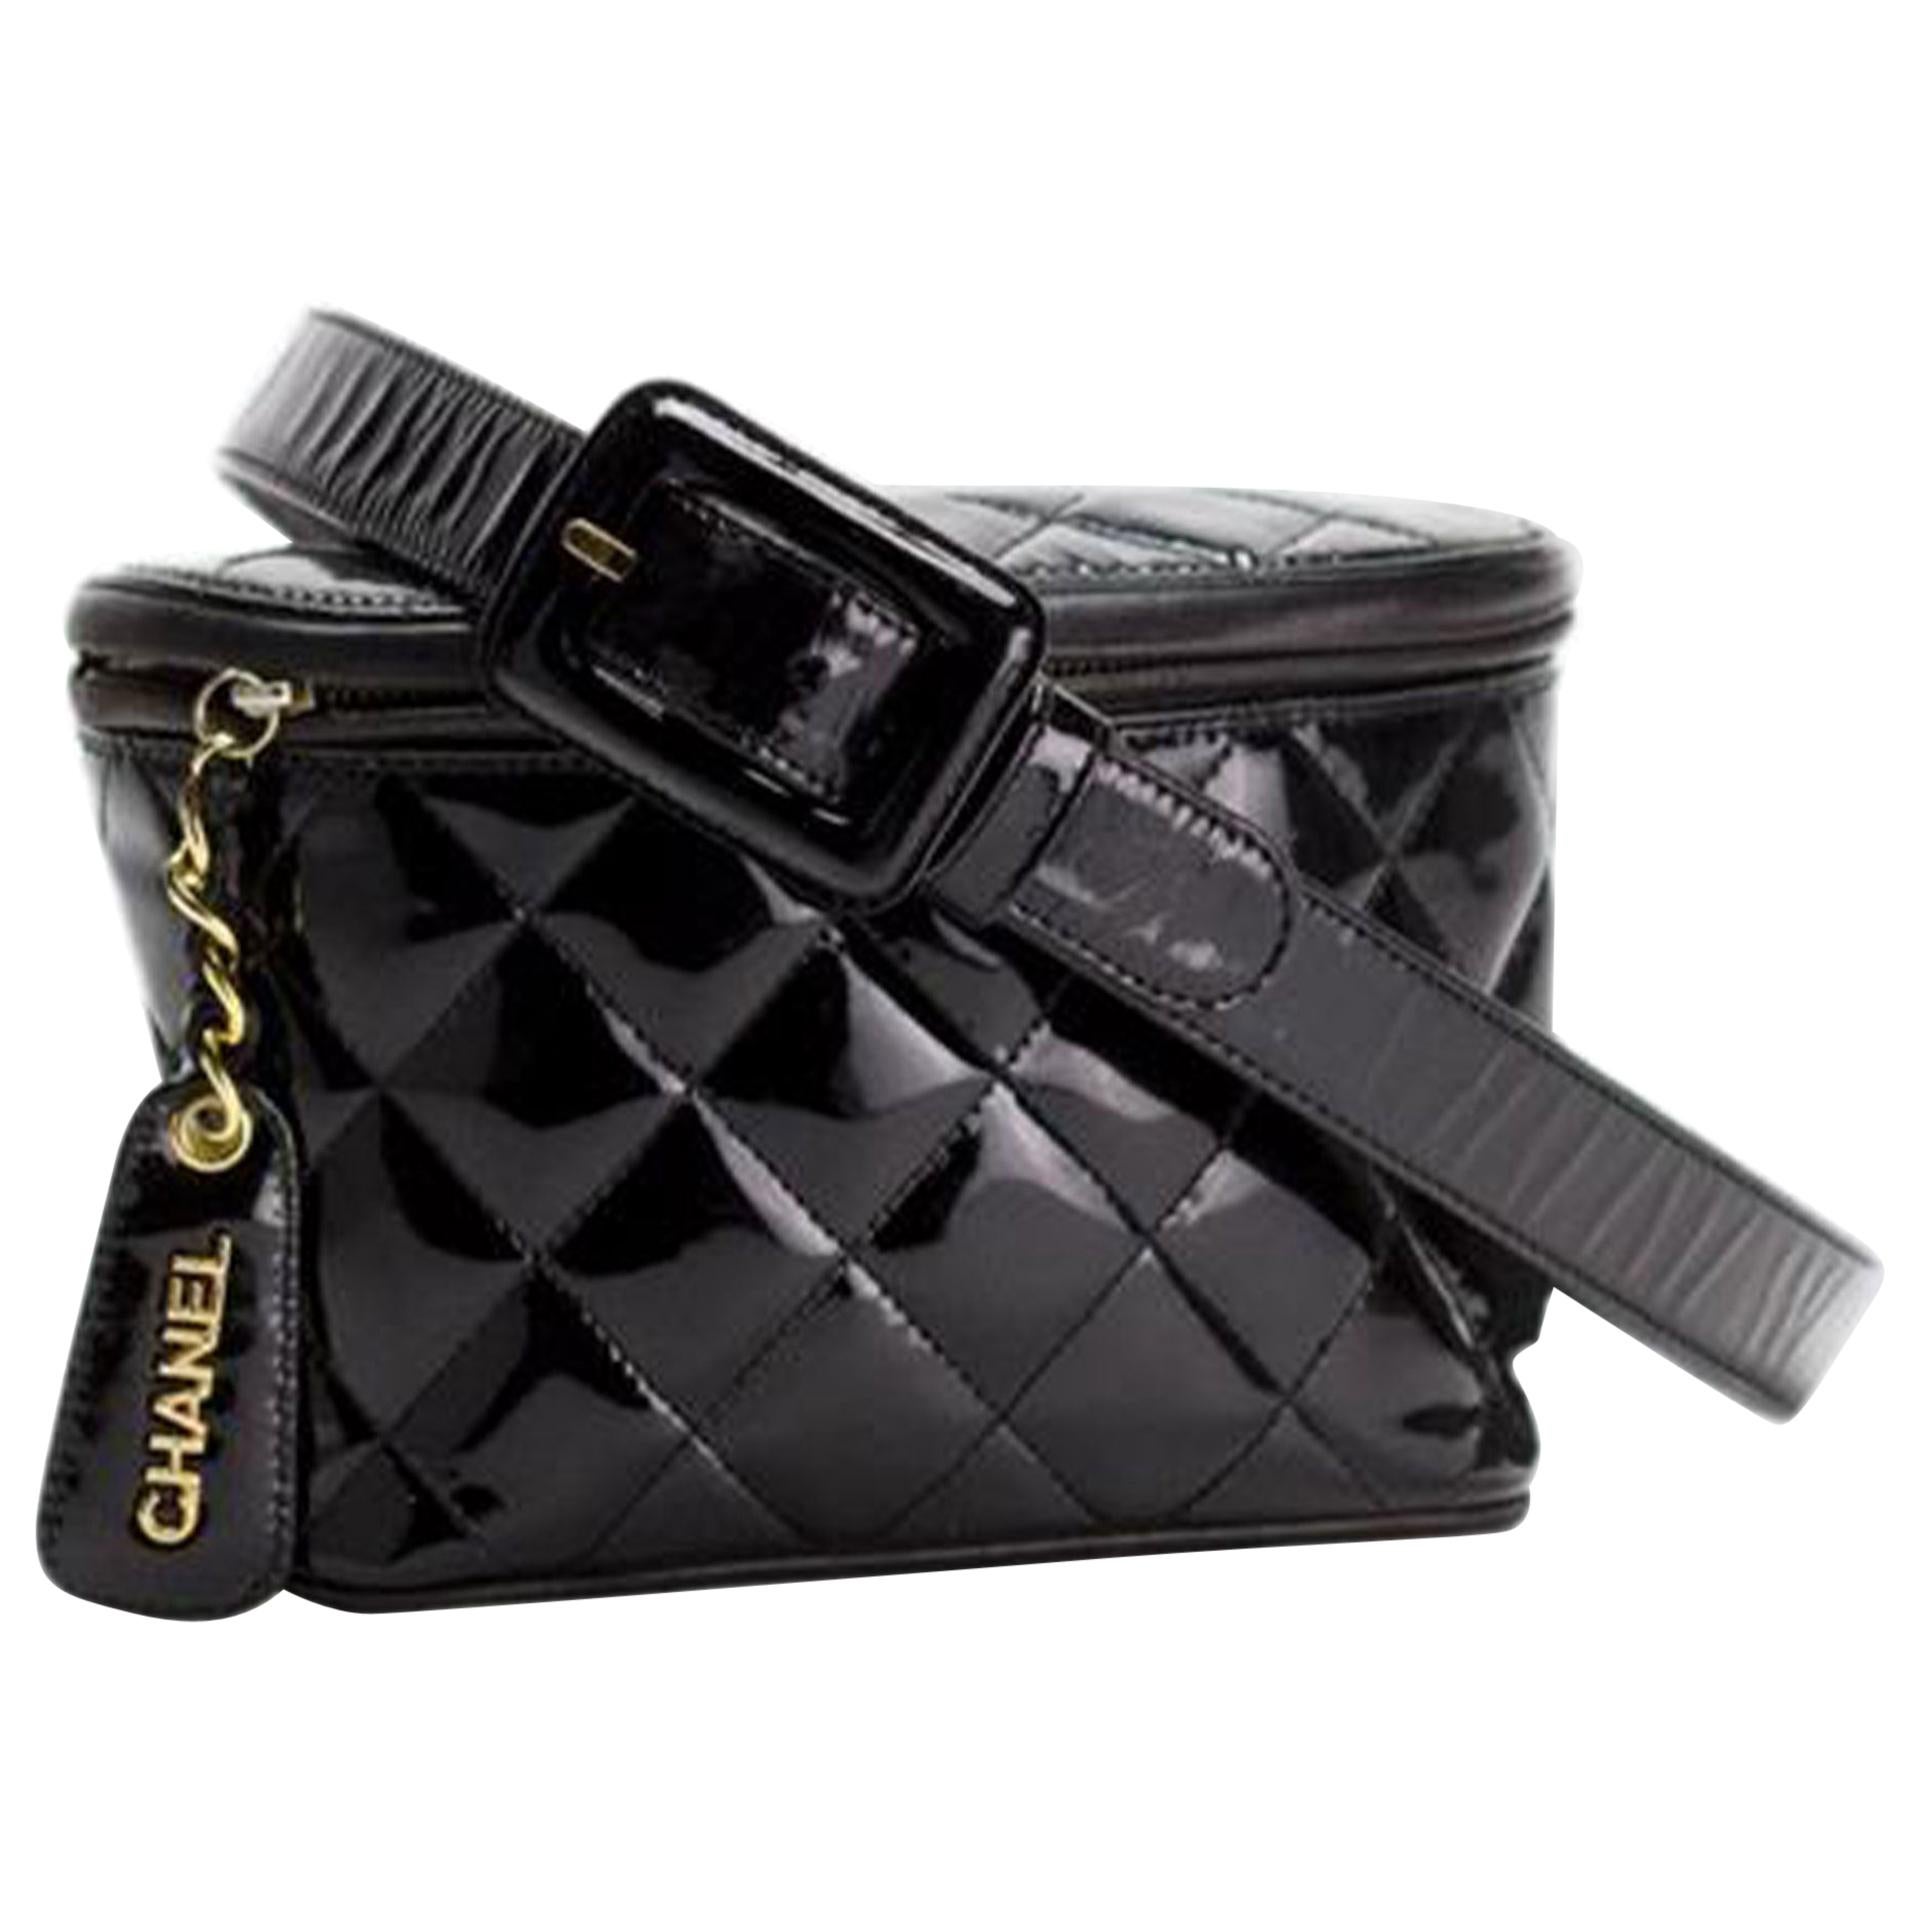 CHANEL, Bags, Chanel Black Leather Bumbag Quilted Uniform Cc Waist Bag  Crossbody Authentic New